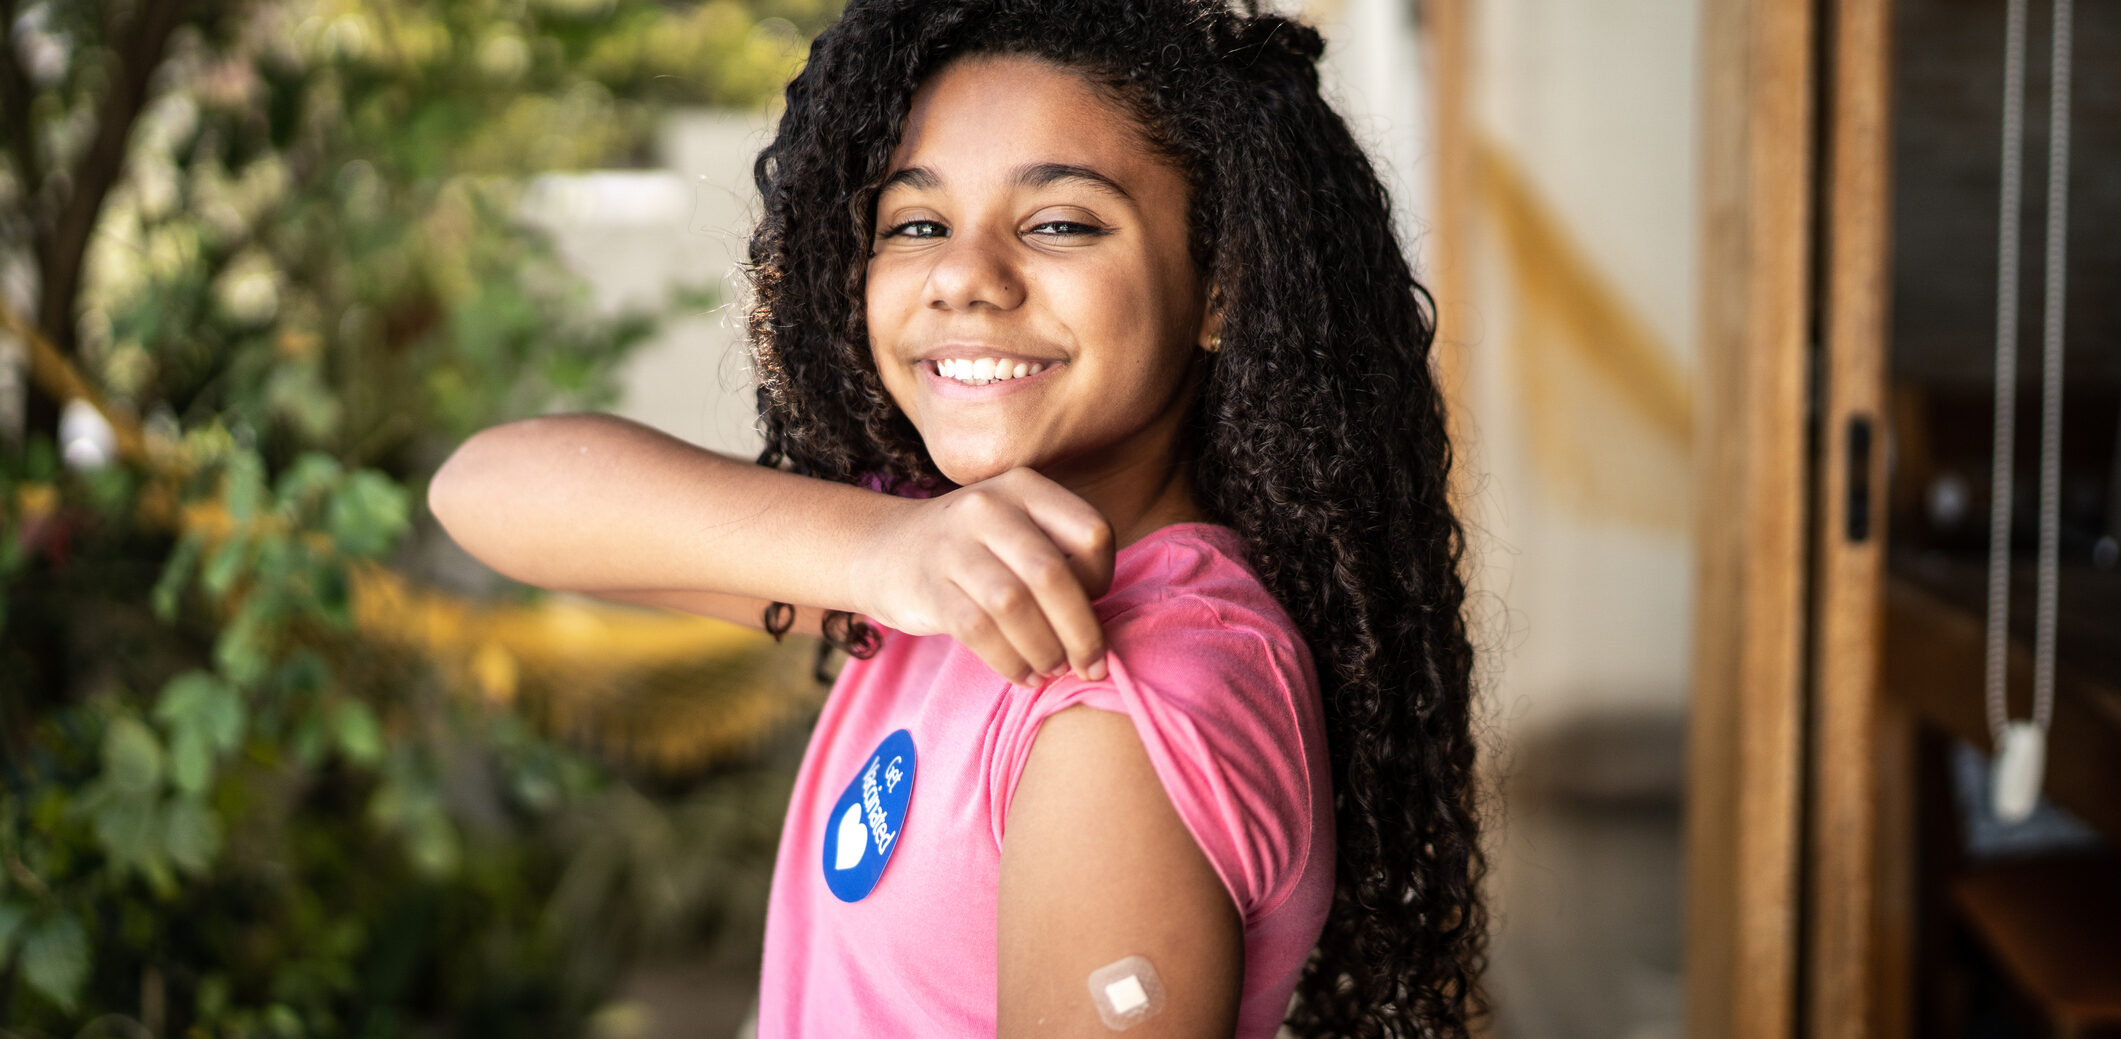 A smiling adolescent with medium skin tone rolls up the sleeve of a pink t-shirt to show off a small band-aid on the left arm. A sticker on the t-shirt reads "Get Vaccinated."